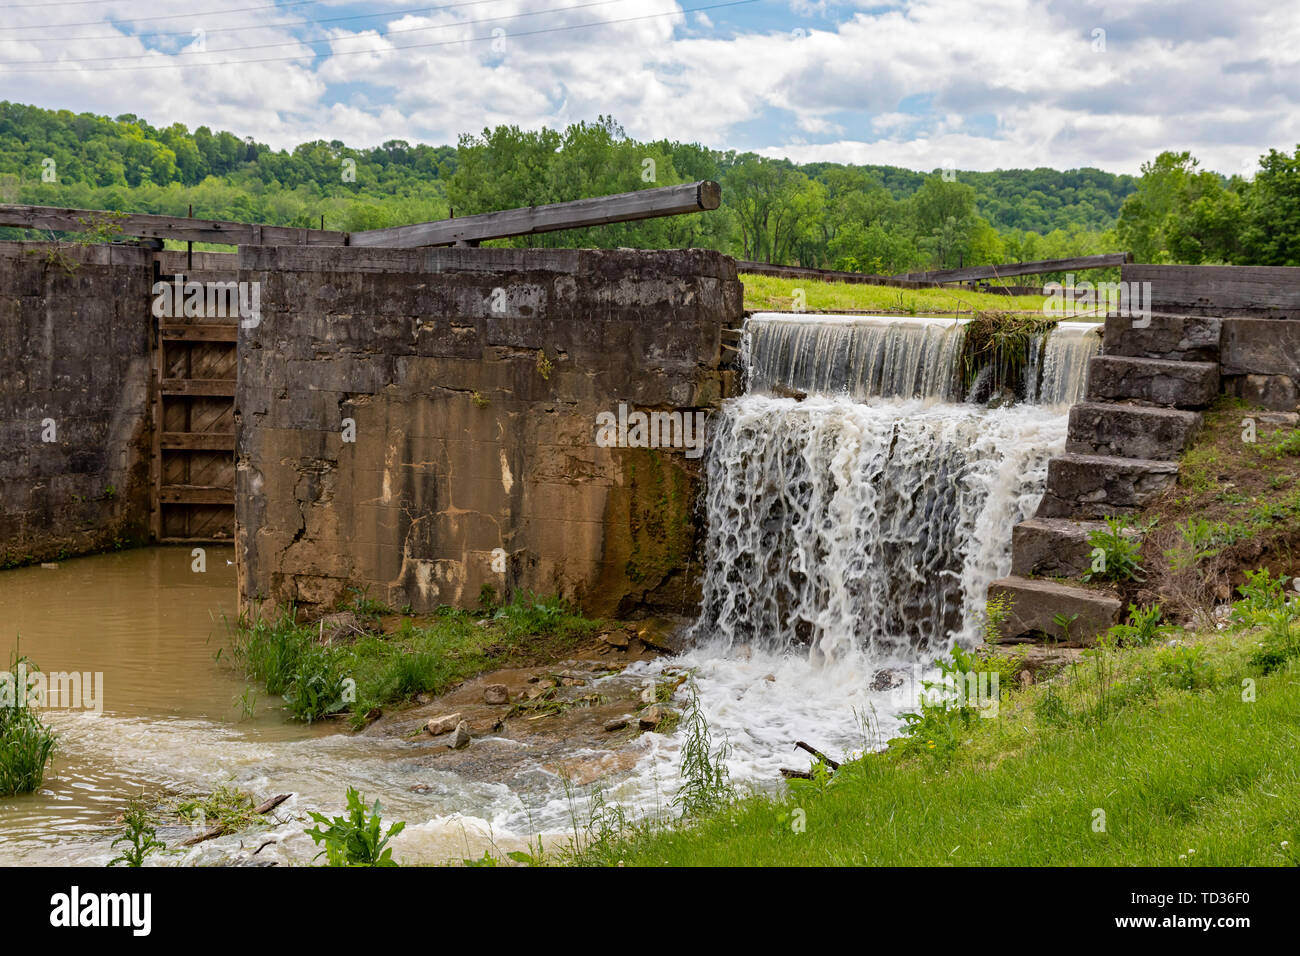 Metamora, Indiana - A lock on the Whitewater Canal. The canal operated for a few years in the mid-18th century in southeastern Indiana. A small part o Stock Photo